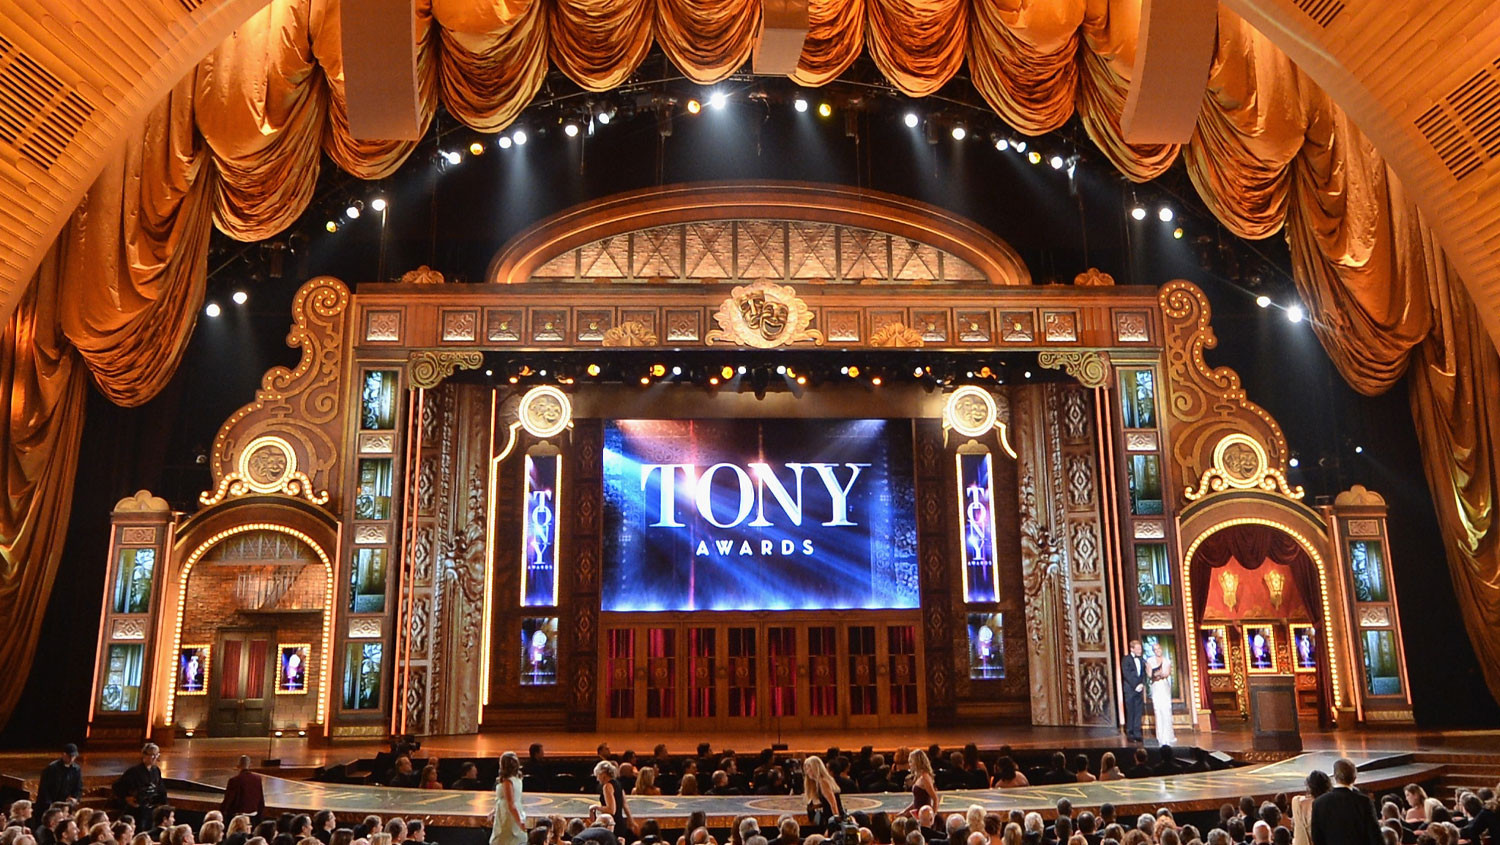 Tony Awards 2023: Date, time, how to watch, expected performances